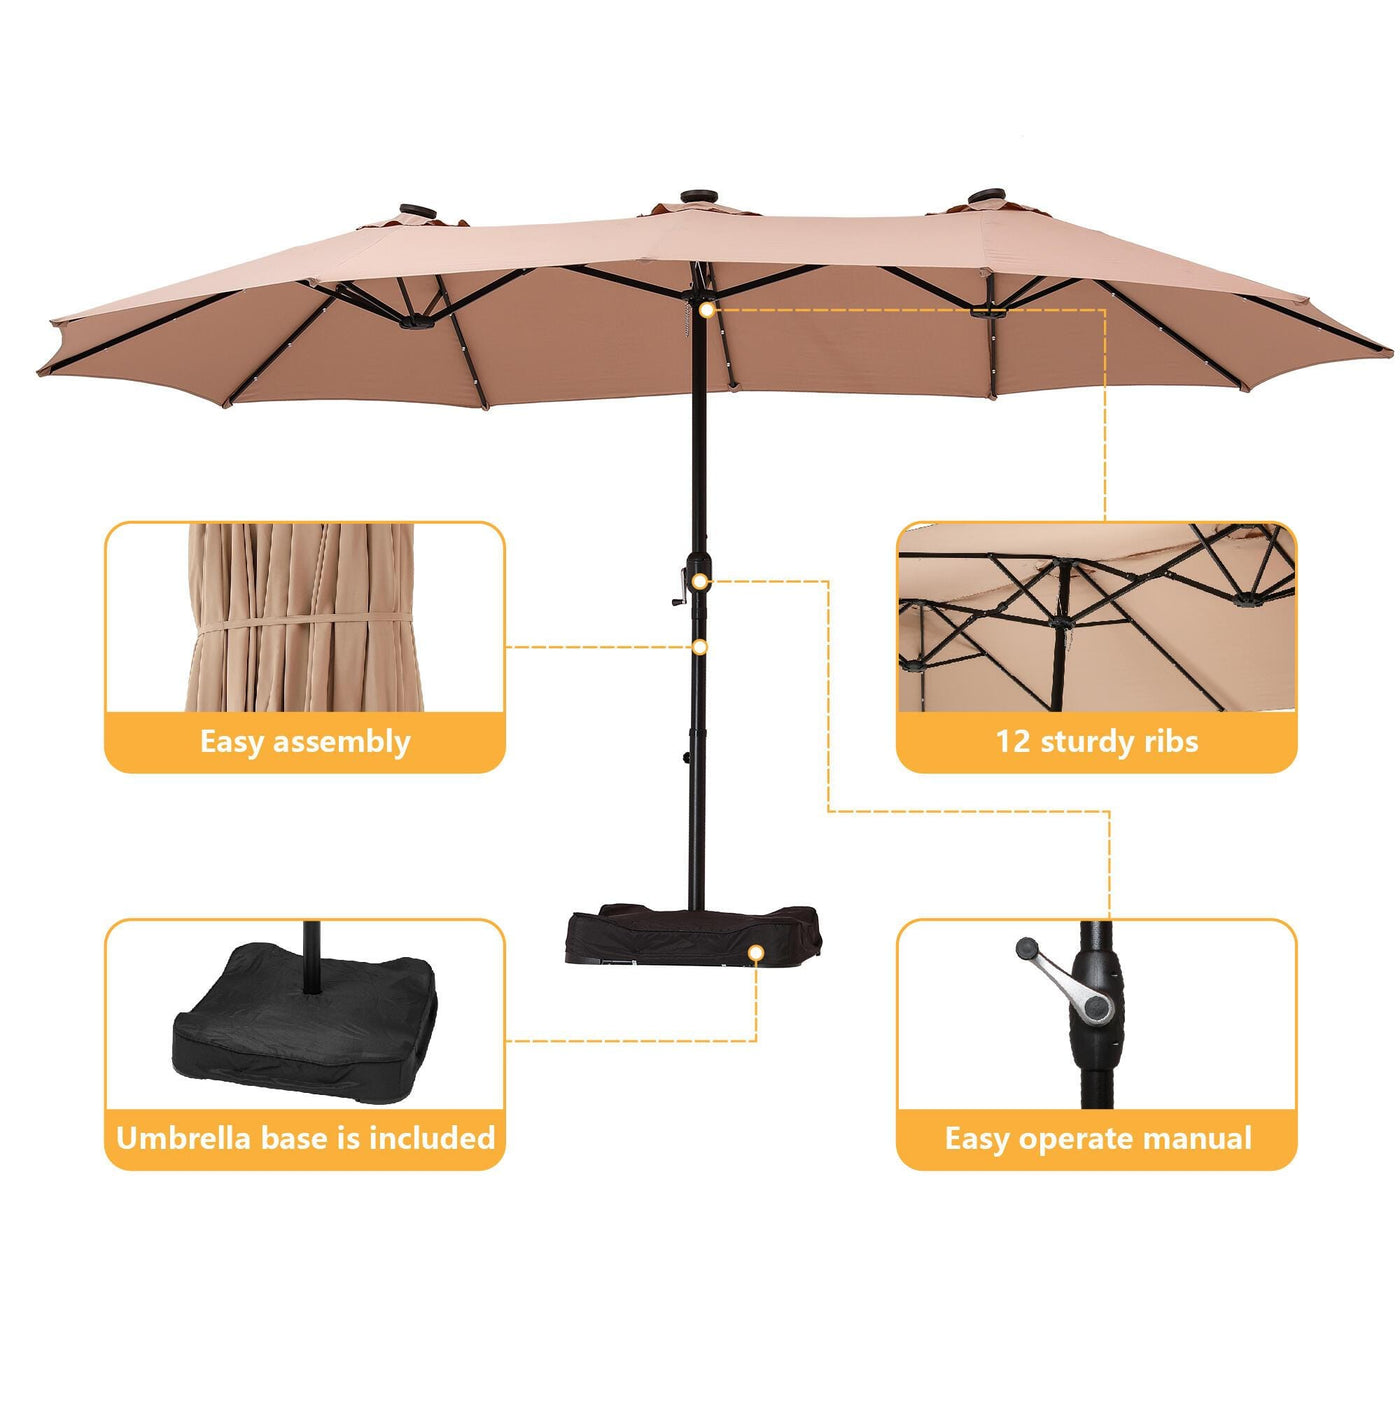 CASAINC 15 ft. Steel Patio Double-Side Market Umbrella with Base and Solar Light - $160